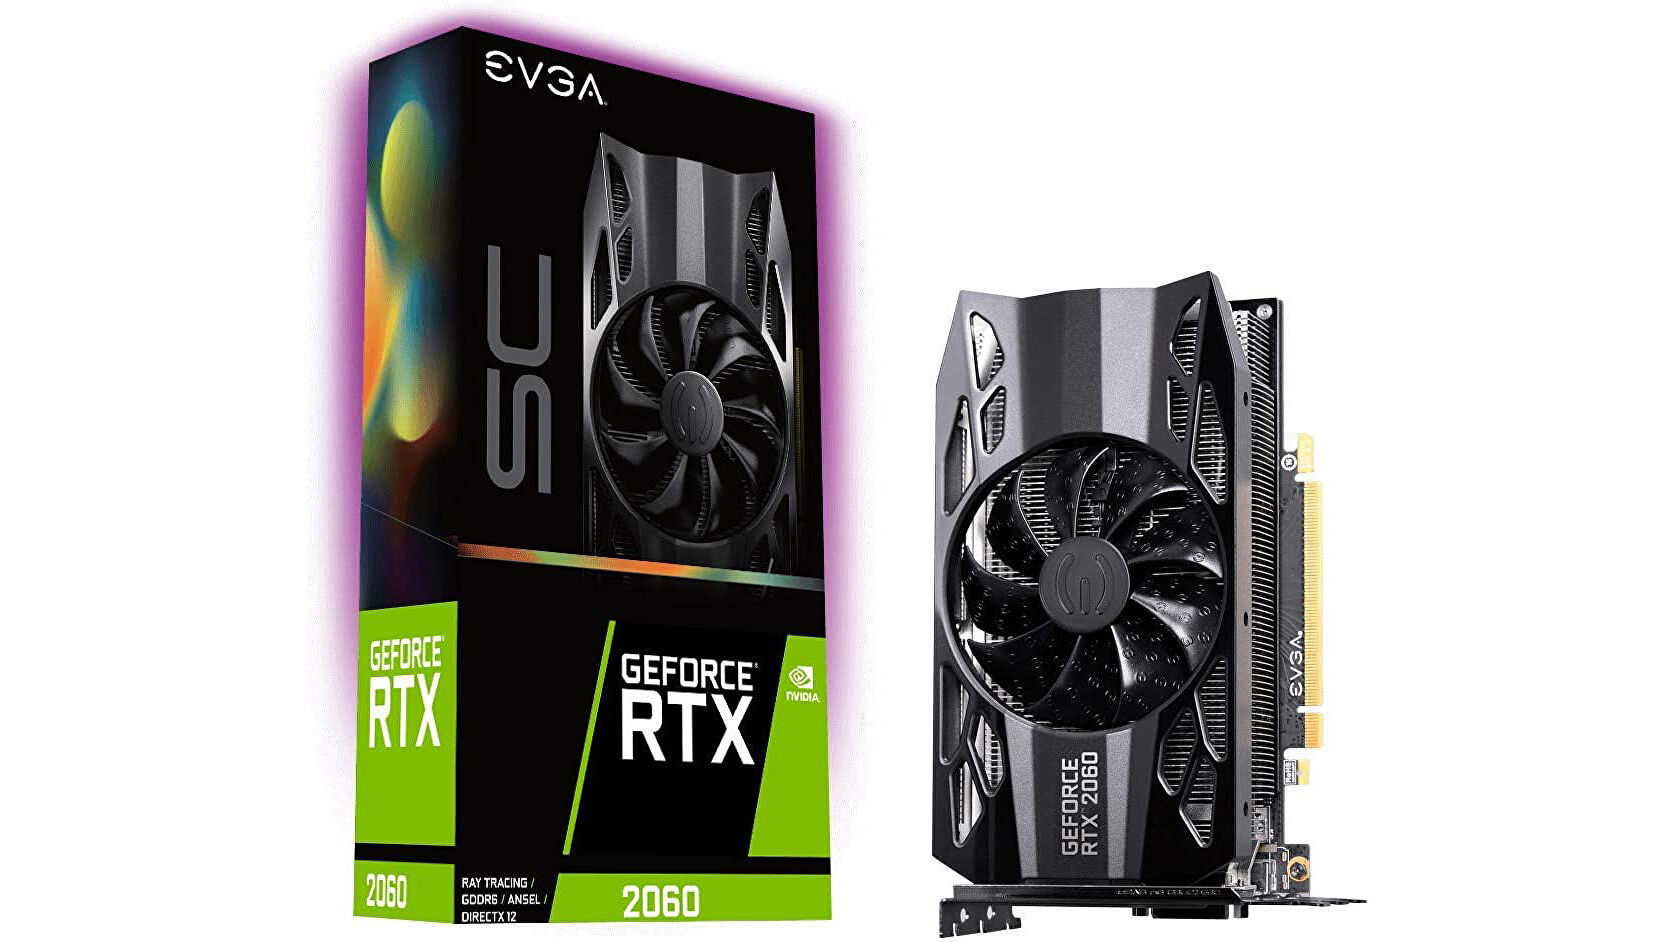 New graphics cards are expensive – so consider the steadfast RTX 2060 at £212